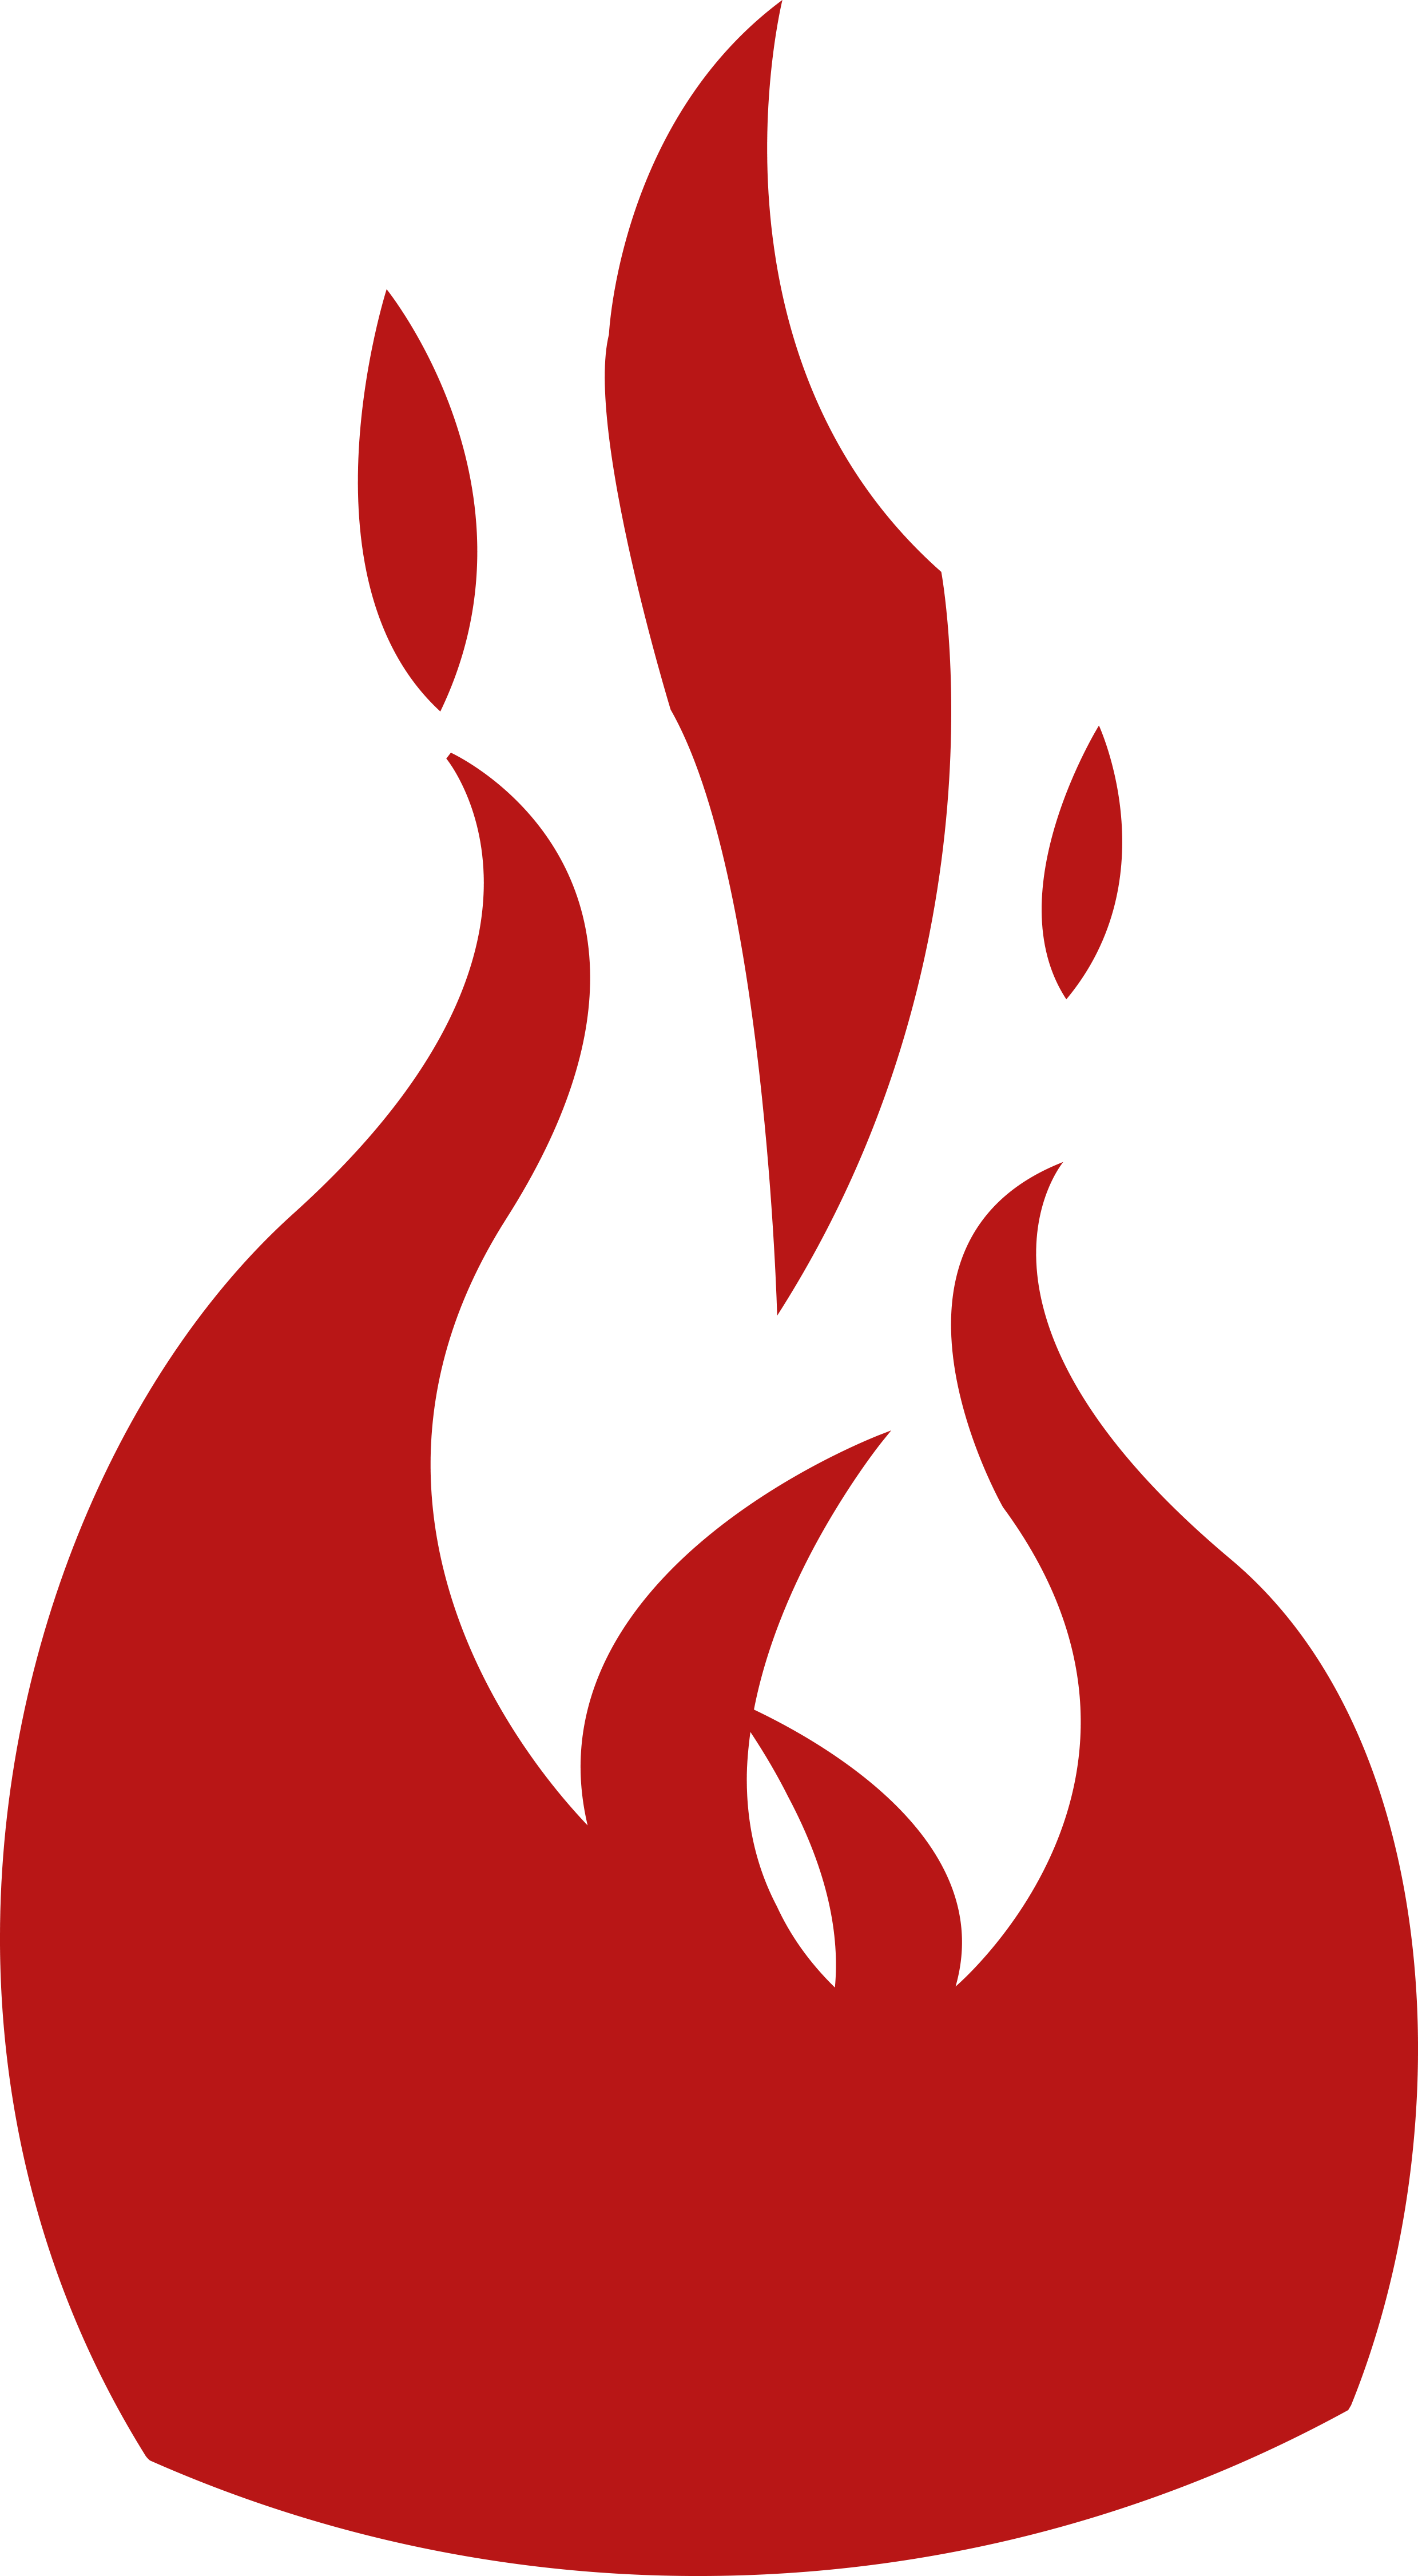 Flame_Negative_Red